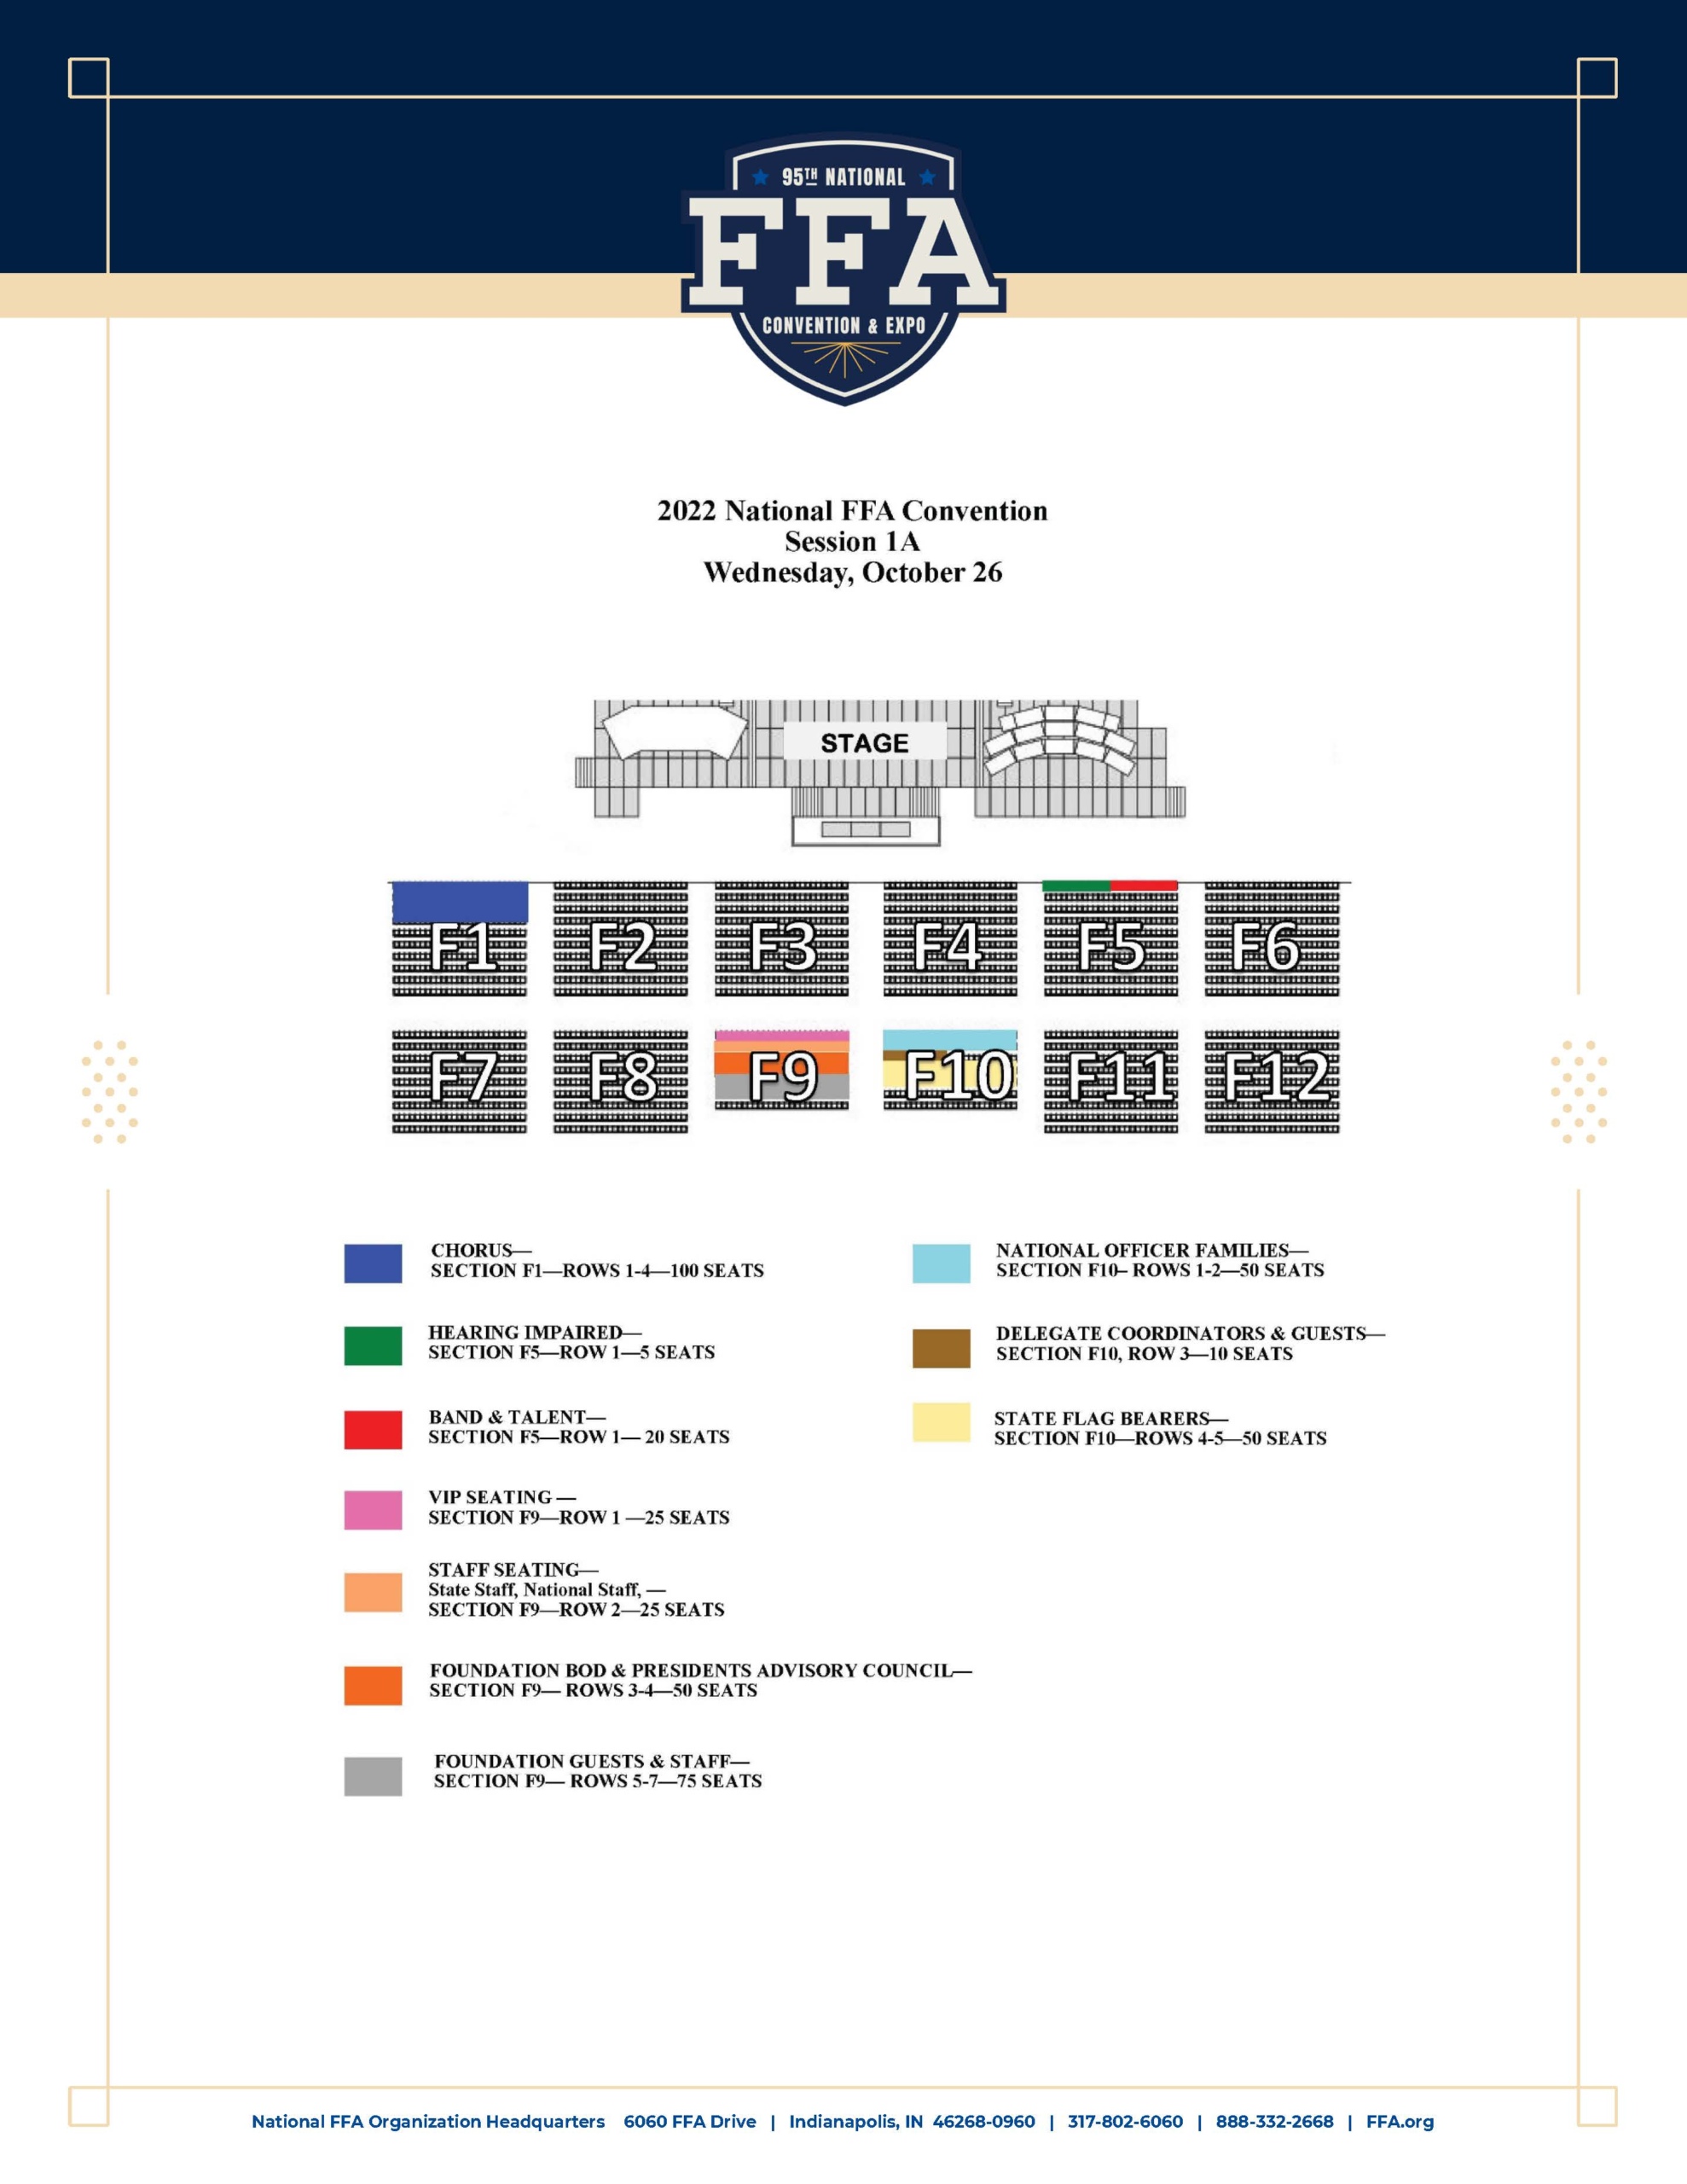 Reserved Seating Maps - All_Page_1